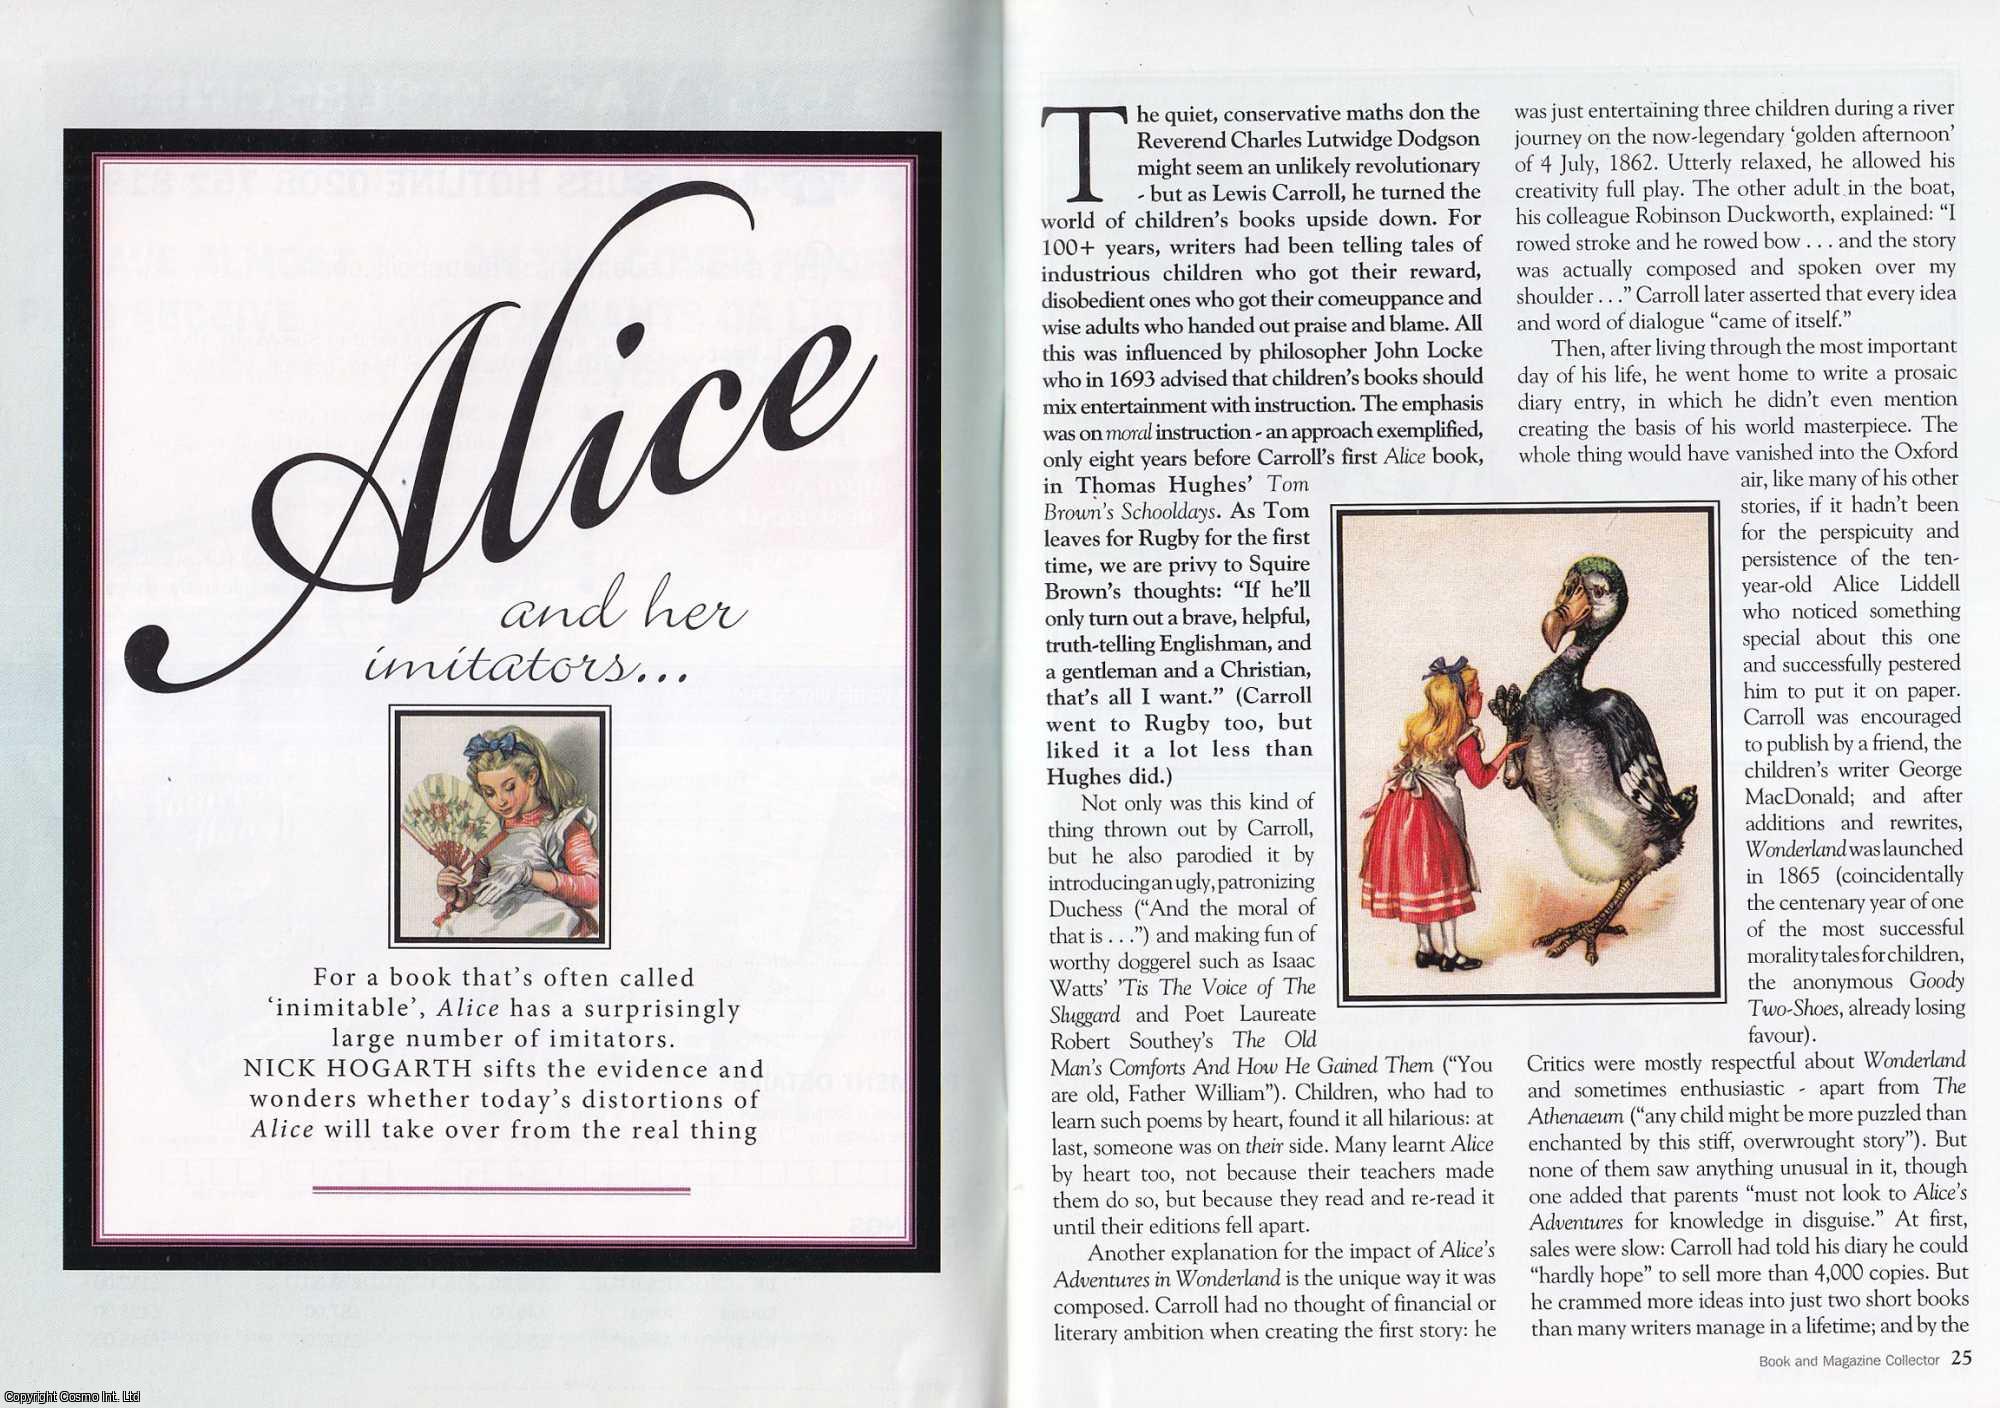 Nick Hogarth - Alice and Her Imitators. This is an original article separated from an issue of The Book & Magazine Collector publication.